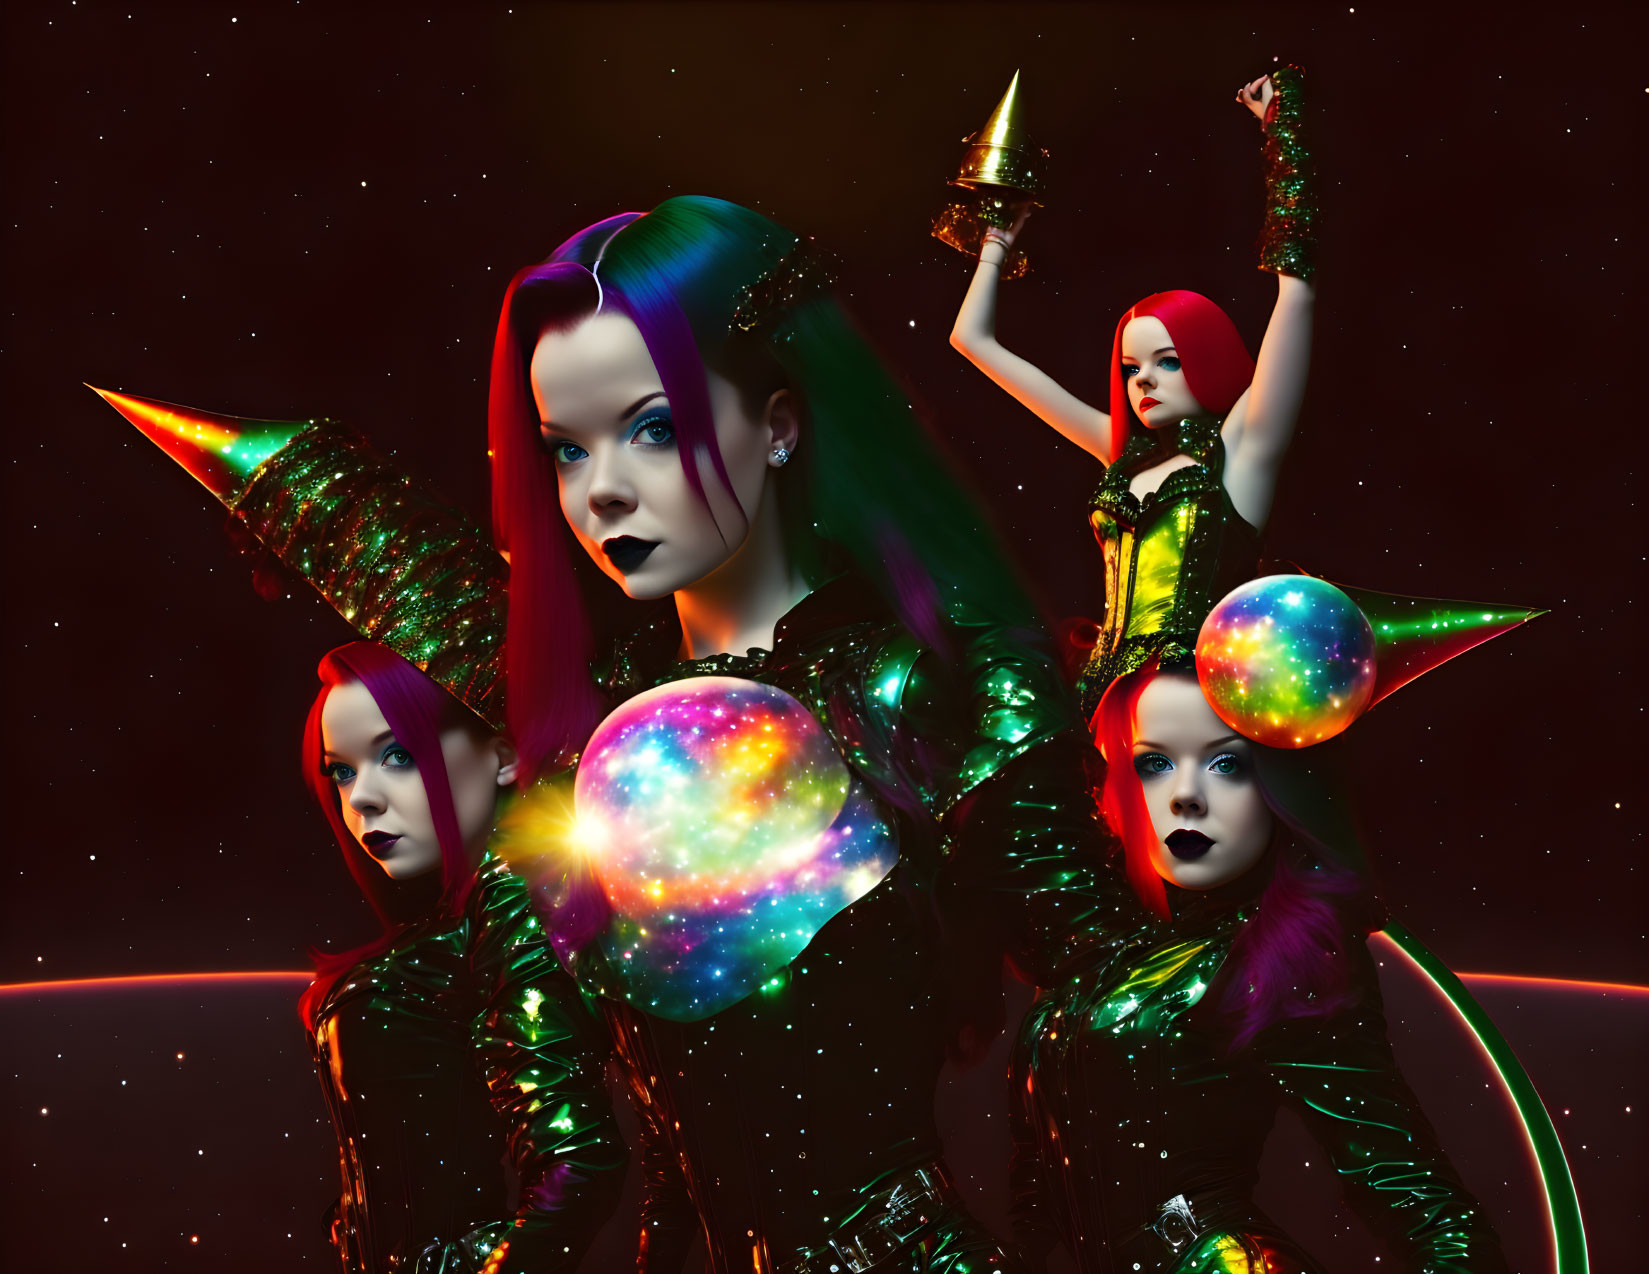 Four futuristic female figures in space-themed attire against a starry background.